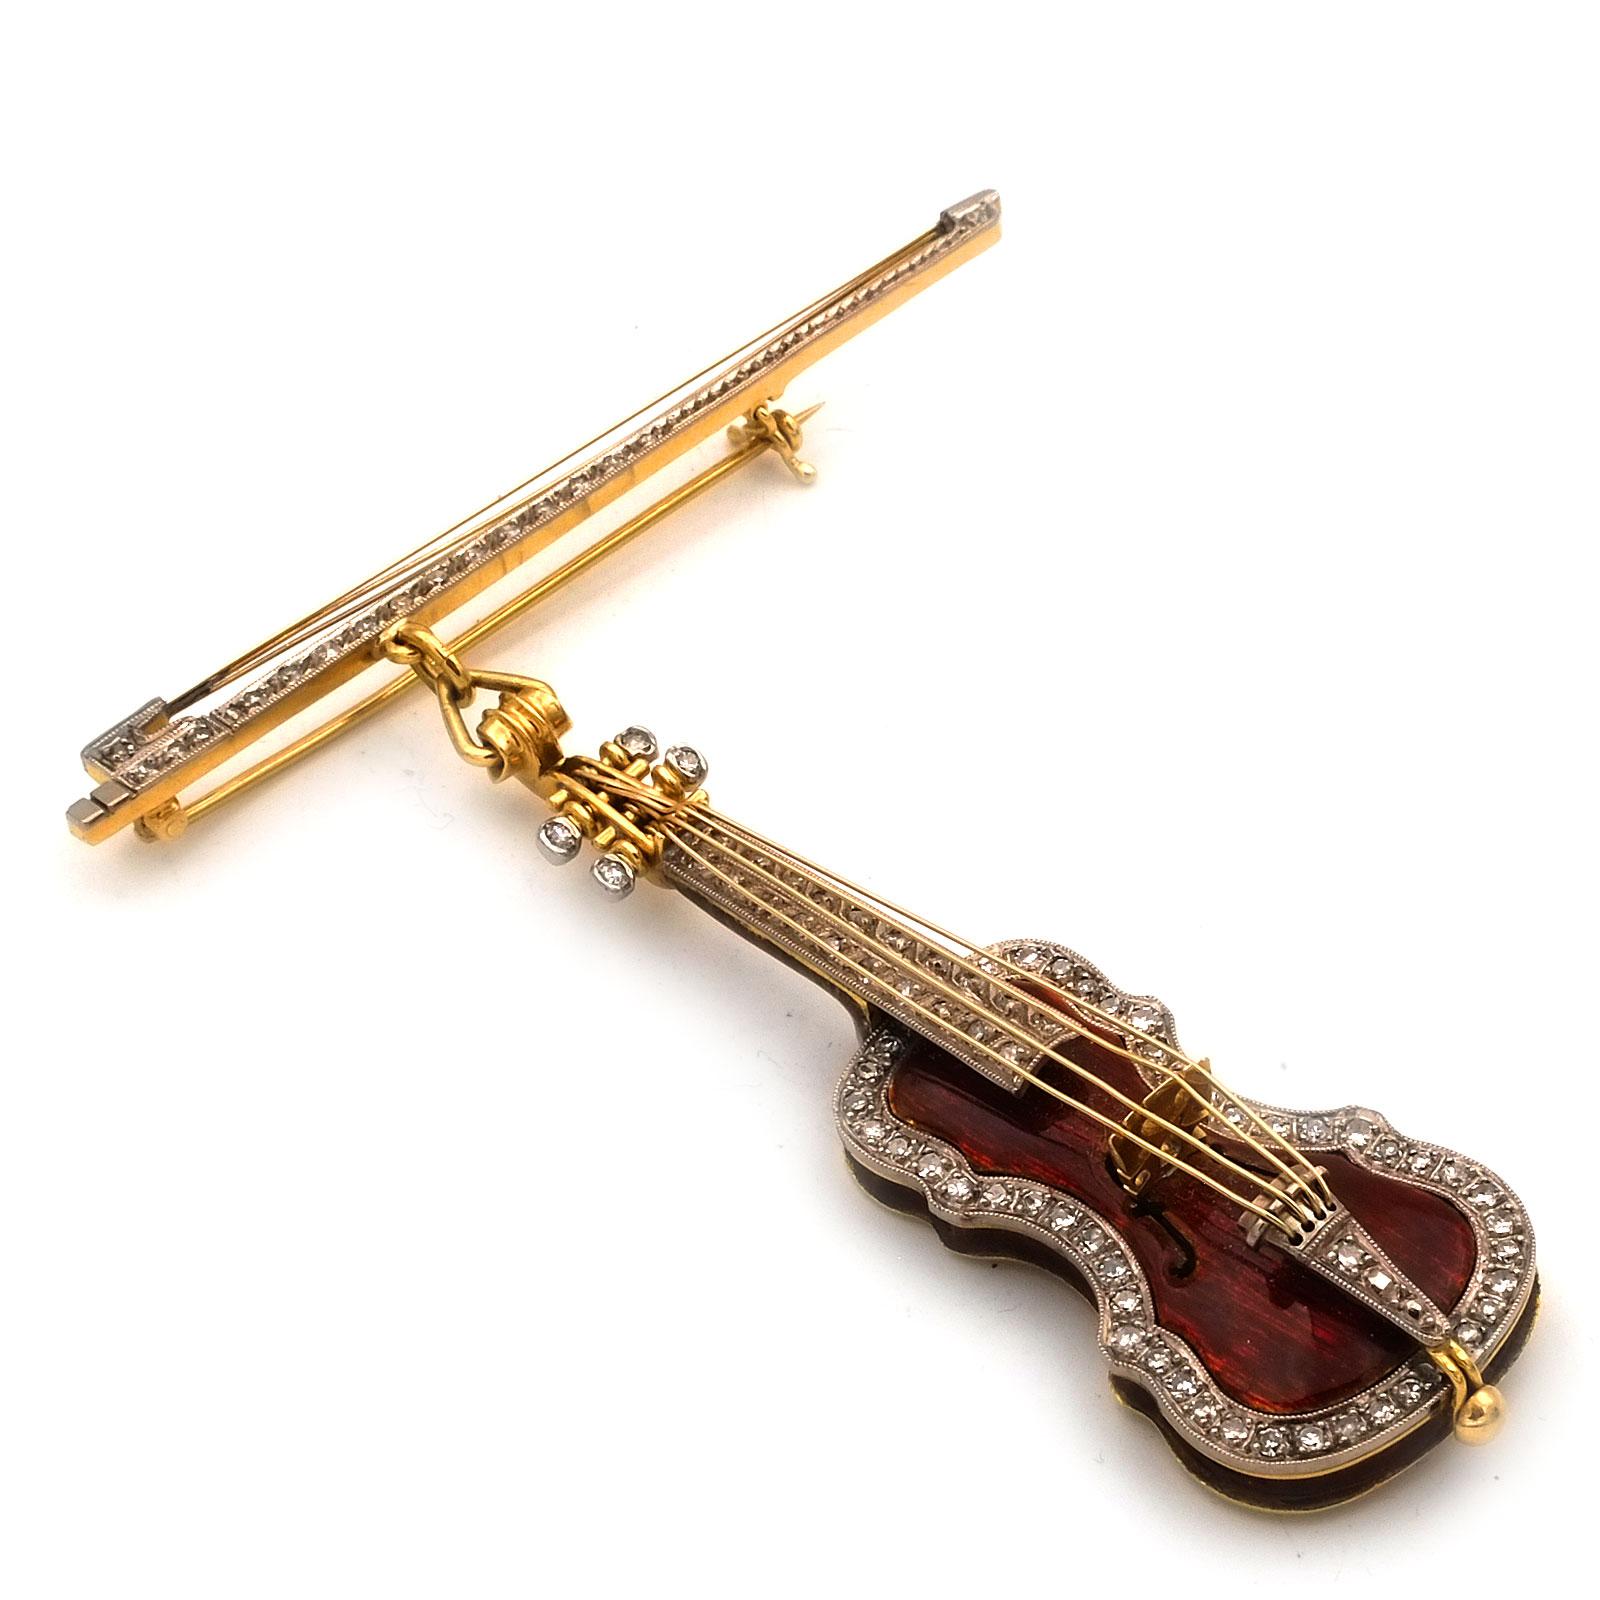 Gold Diamond and Enamel Stradivari Violin and Bow Brooch, circa 1930

Wonderful 18K  gold and diamond brooch in the shape of a lifelike Stradivarius violin, flexibly mounted on the accompanying violin bow, which also serves as a needle. Brilliant